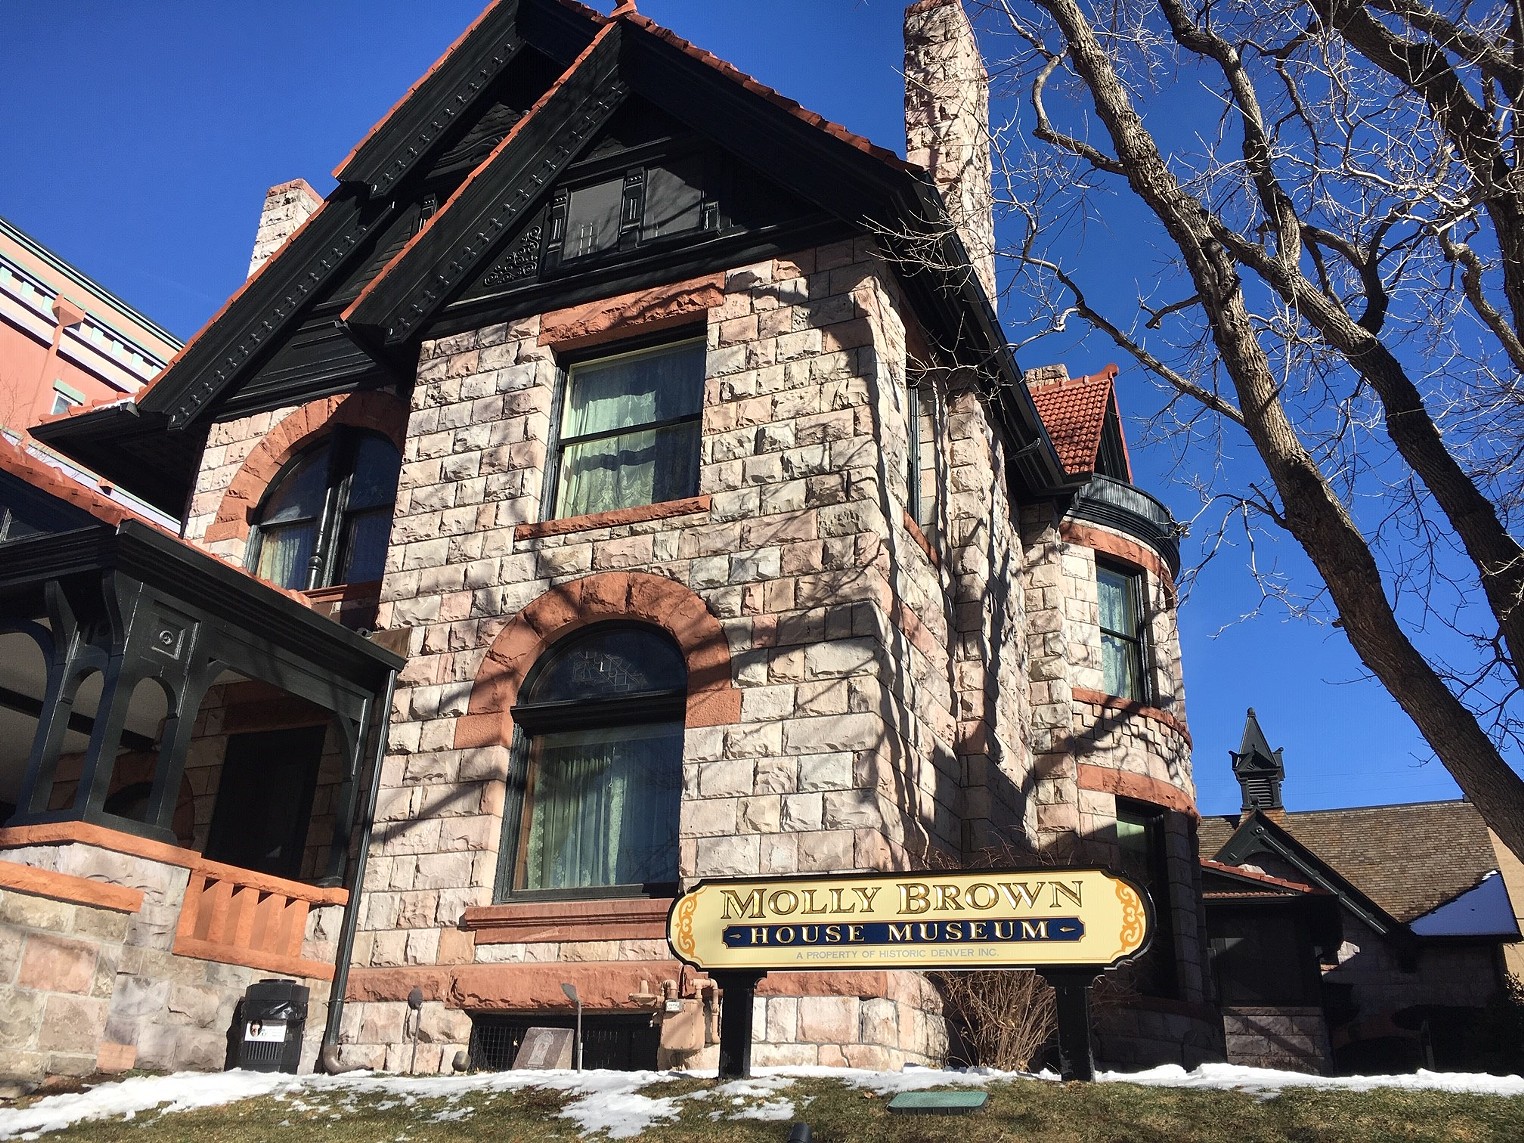 Best Museum Shop for Adults 2015, Molly Brown House Museum